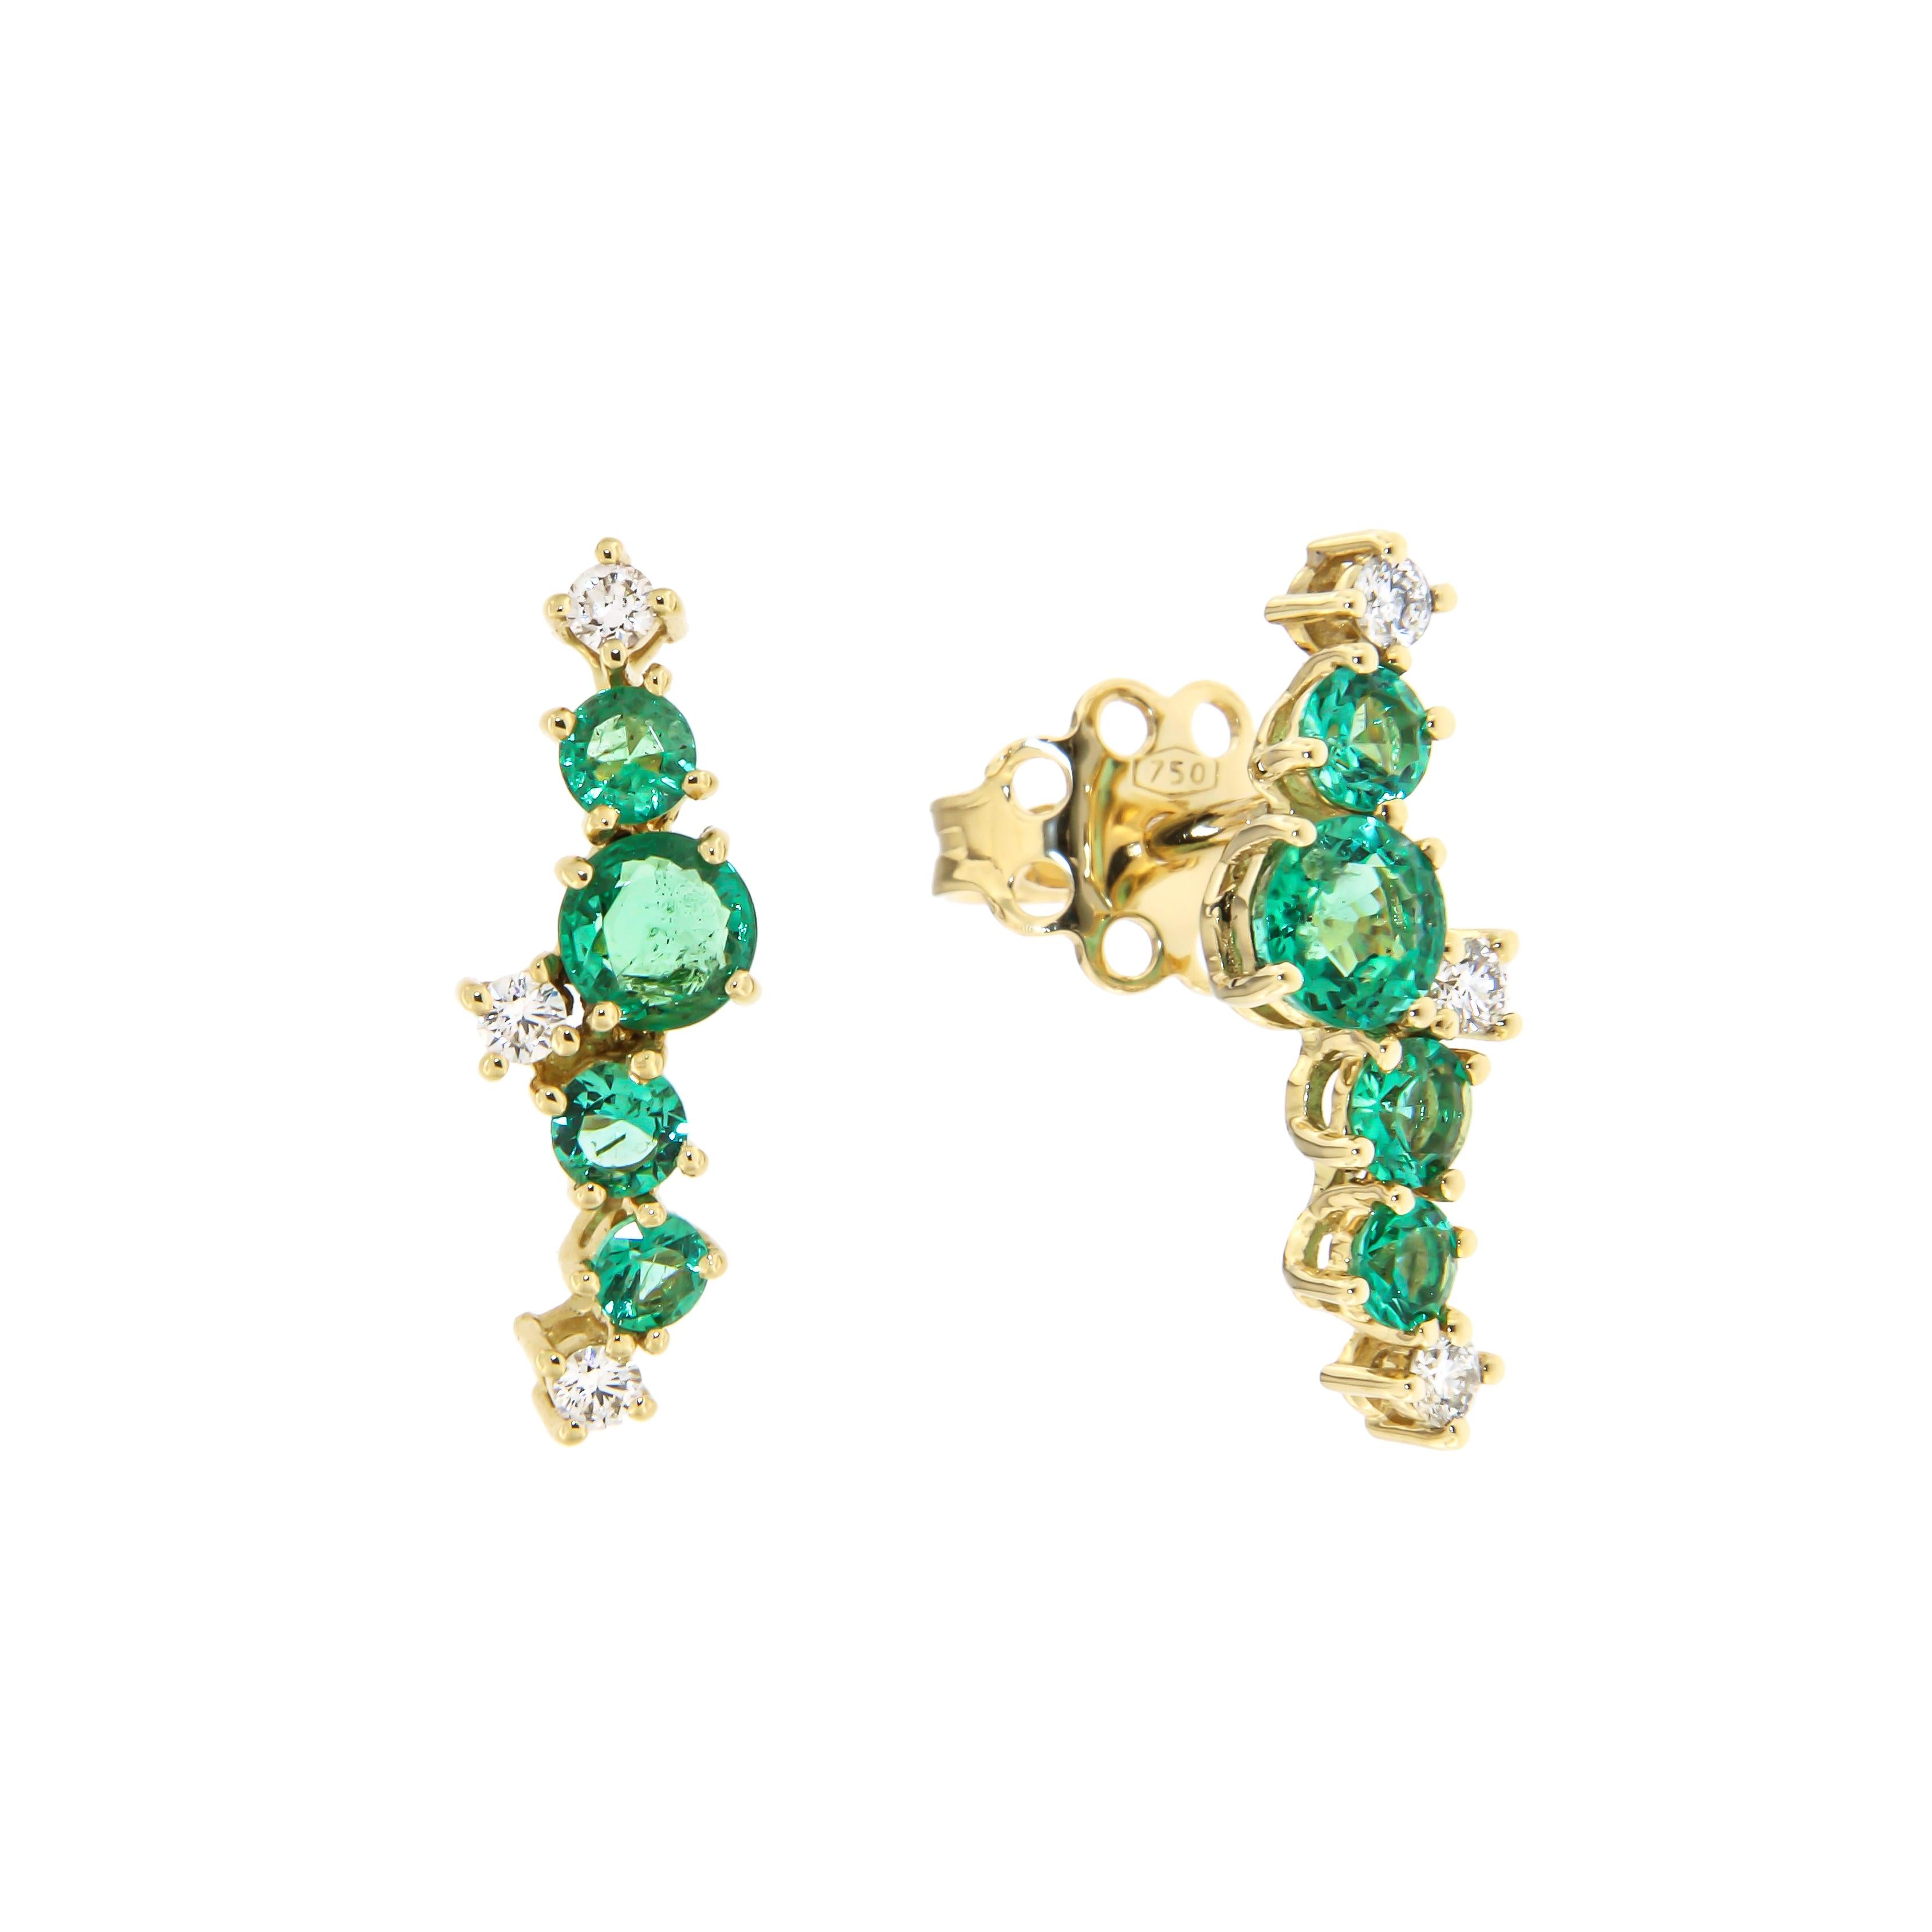 Antique Cushion Cut Fancy Natural Emerald 18k Diamonds Yellow Gold Earrings for Her For Sale